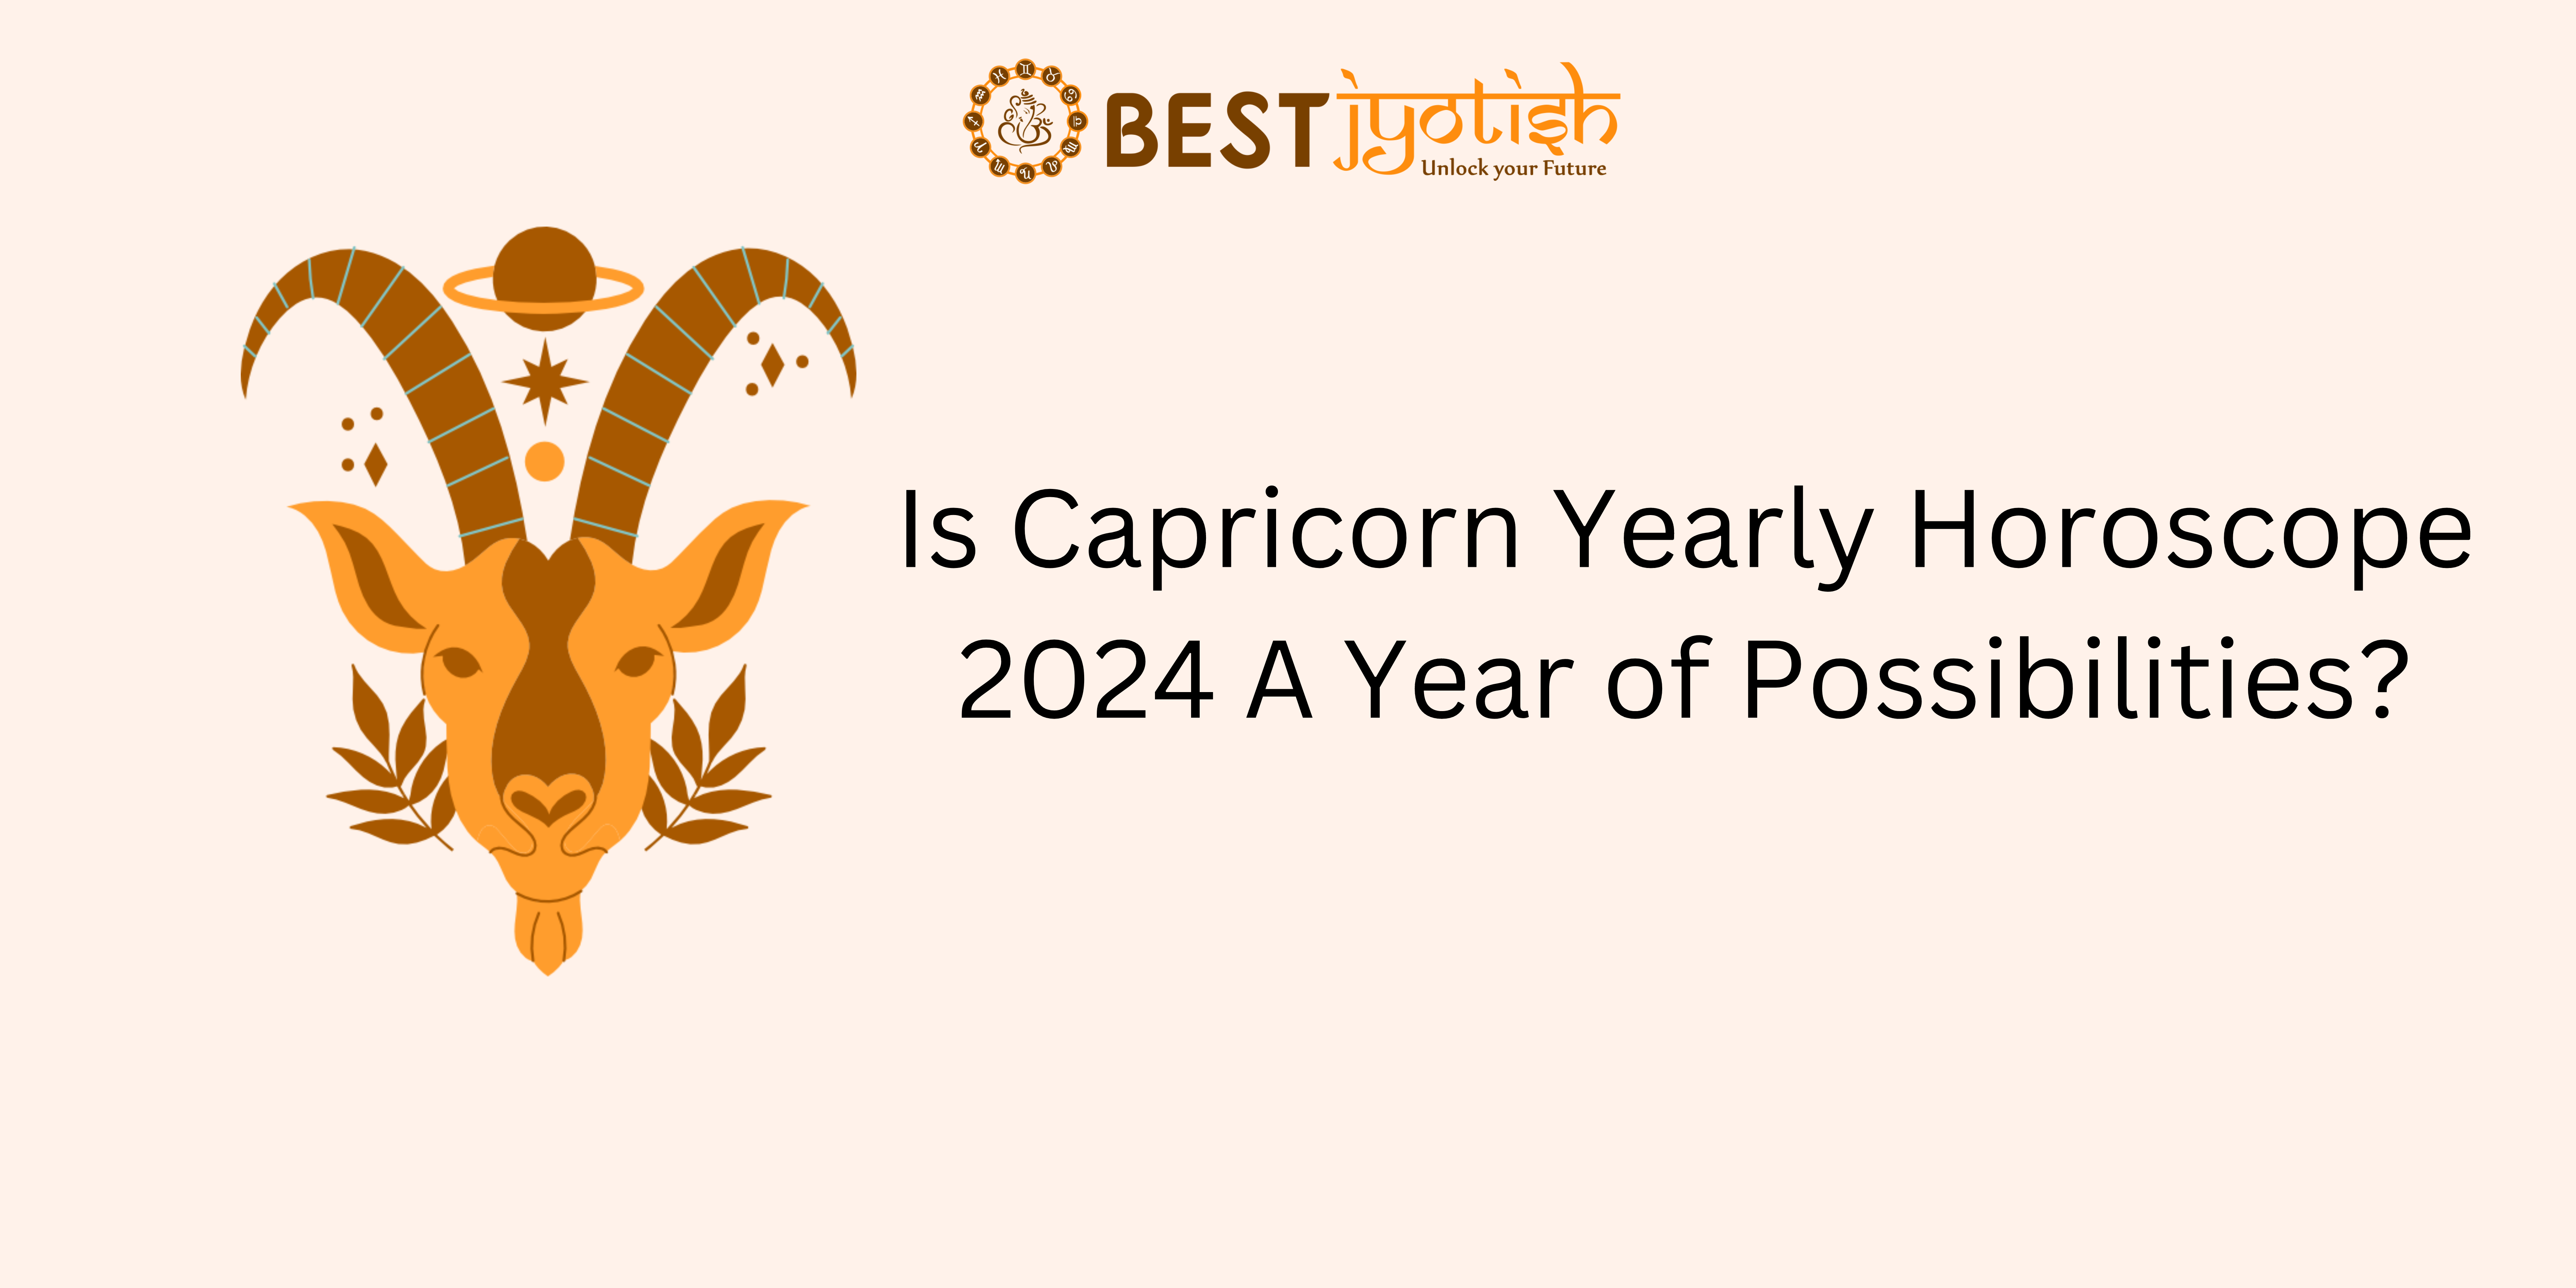 Is Capricorn Yearly Horoscope 2024 A Year of Possibilities?